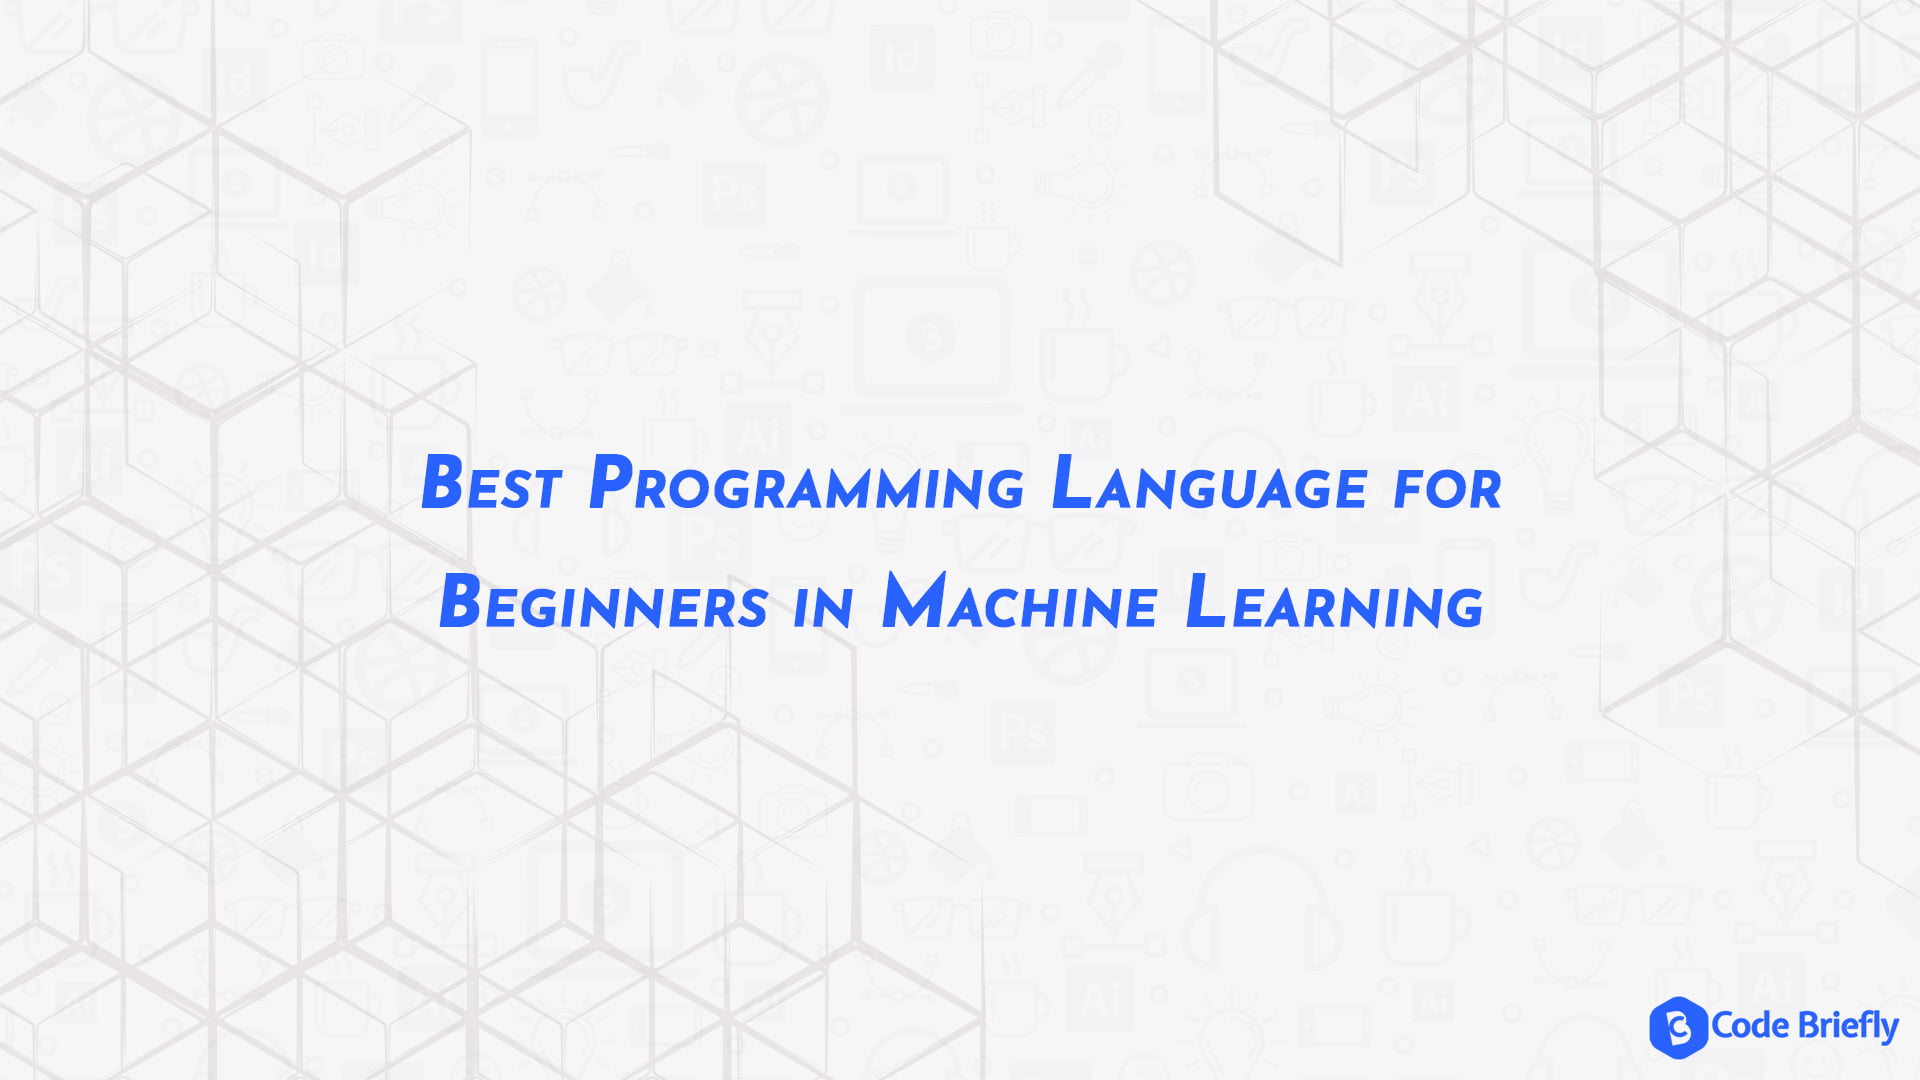 Best Programming Language for Beginners in Machine Learning